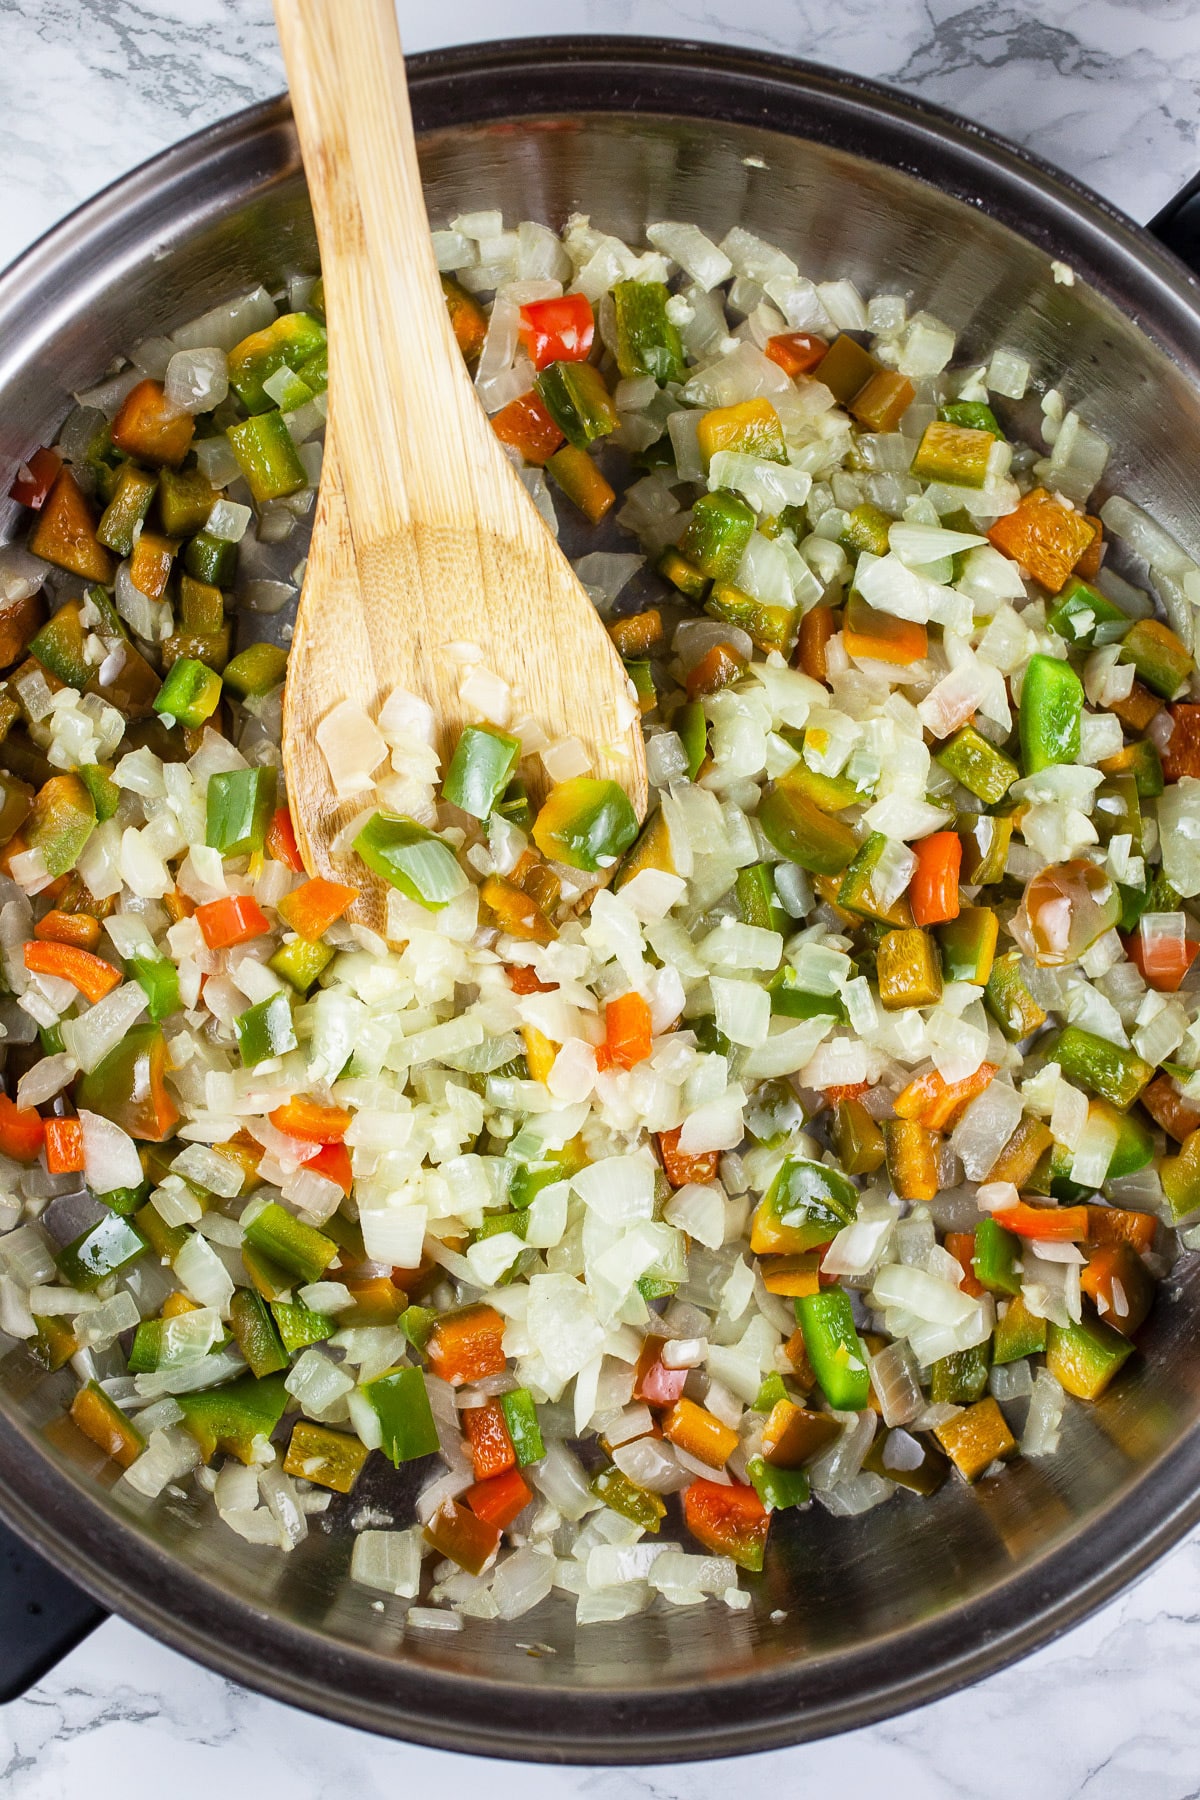 Garlic, onions, and peppers sautéed in skillet with wooden spoon.